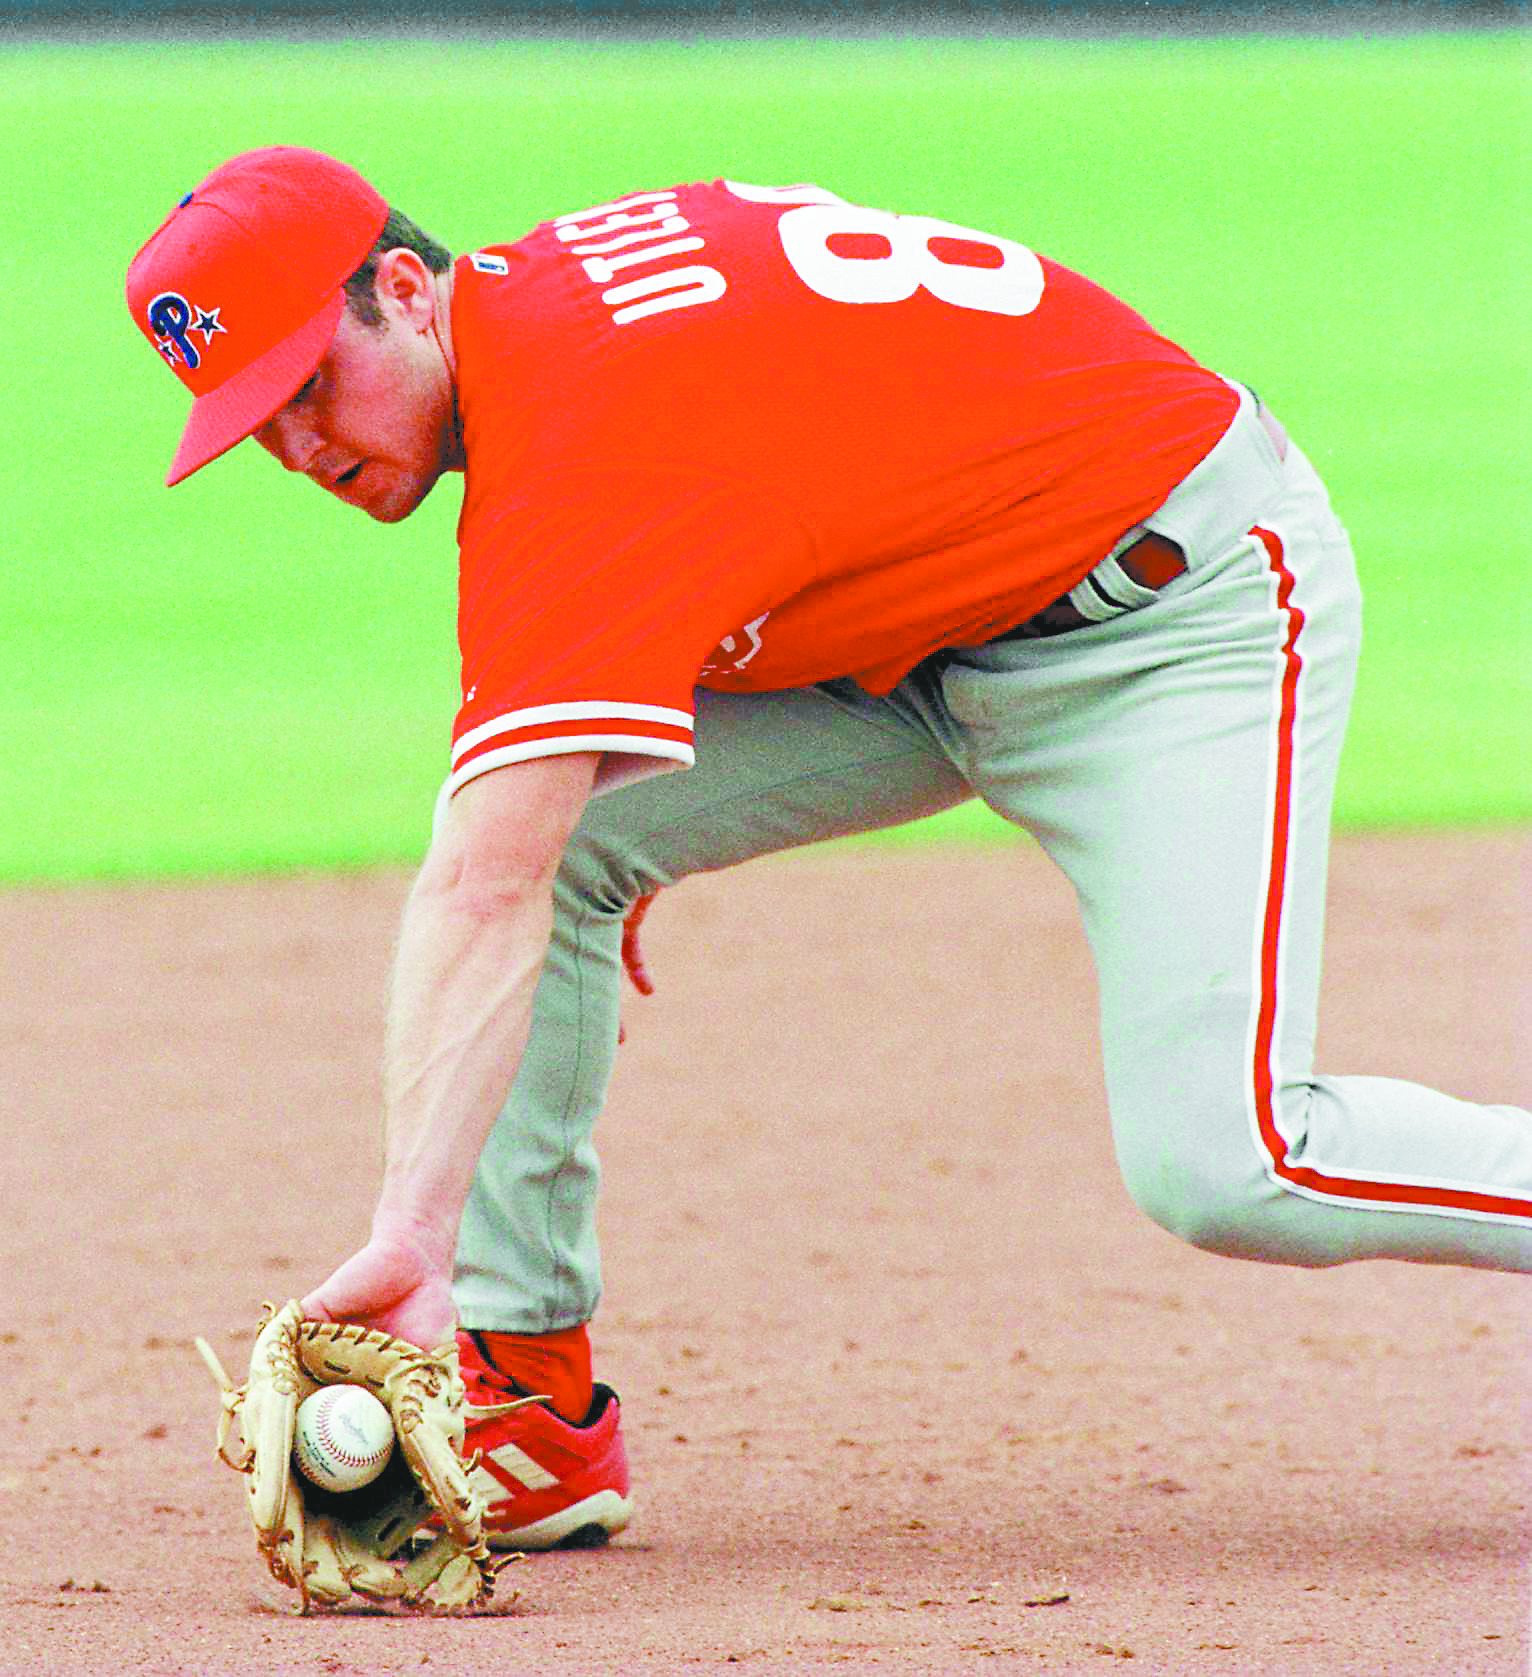 Phillies' Utley has utterly no Hollywood ego